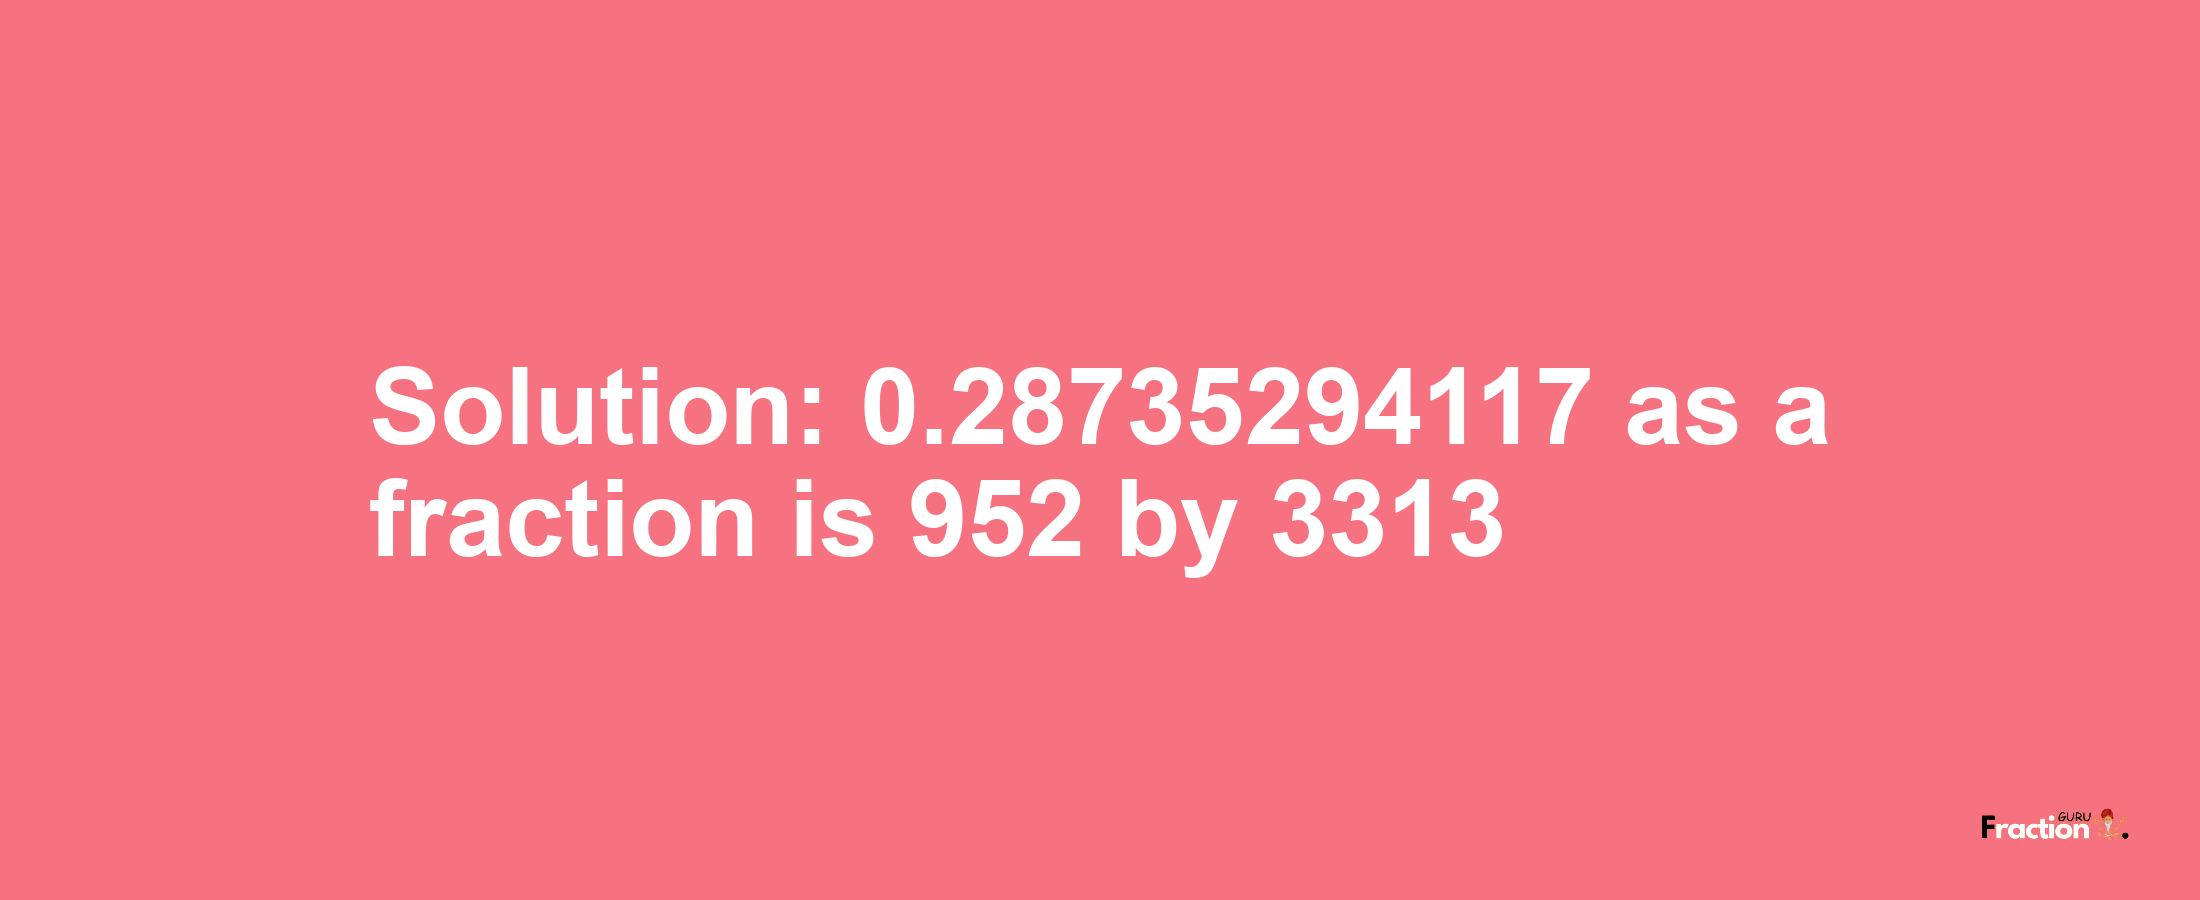 Solution:0.28735294117 as a fraction is 952/3313